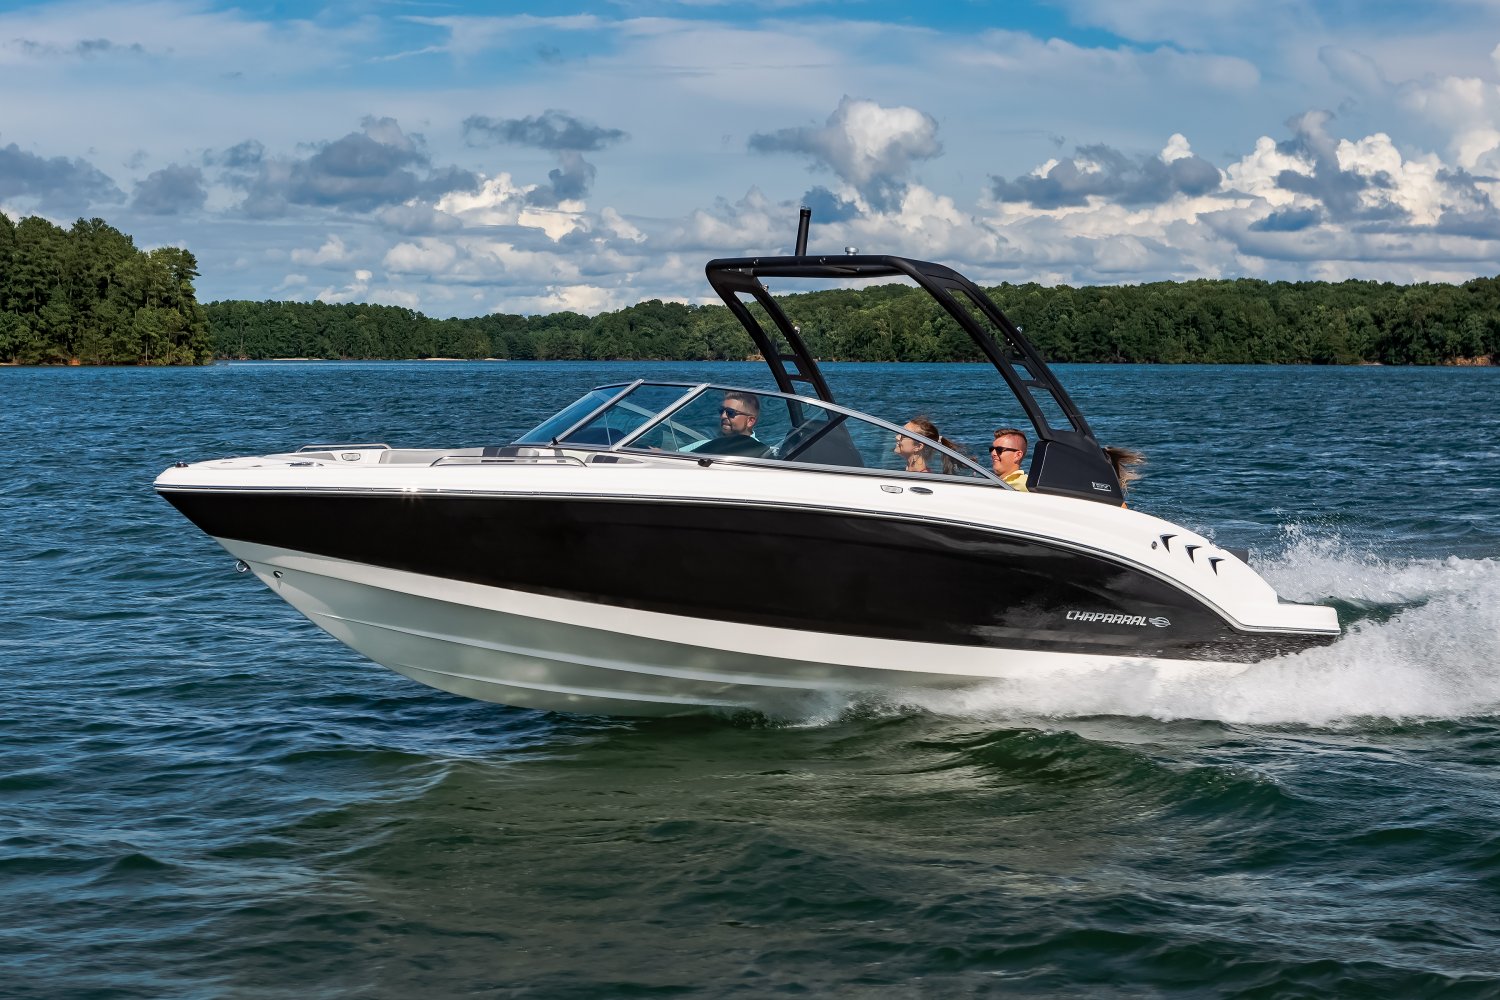 Chaparral And Robalo Introduce New Models Top Dealers At Annual Dealer Conference Boating Industry